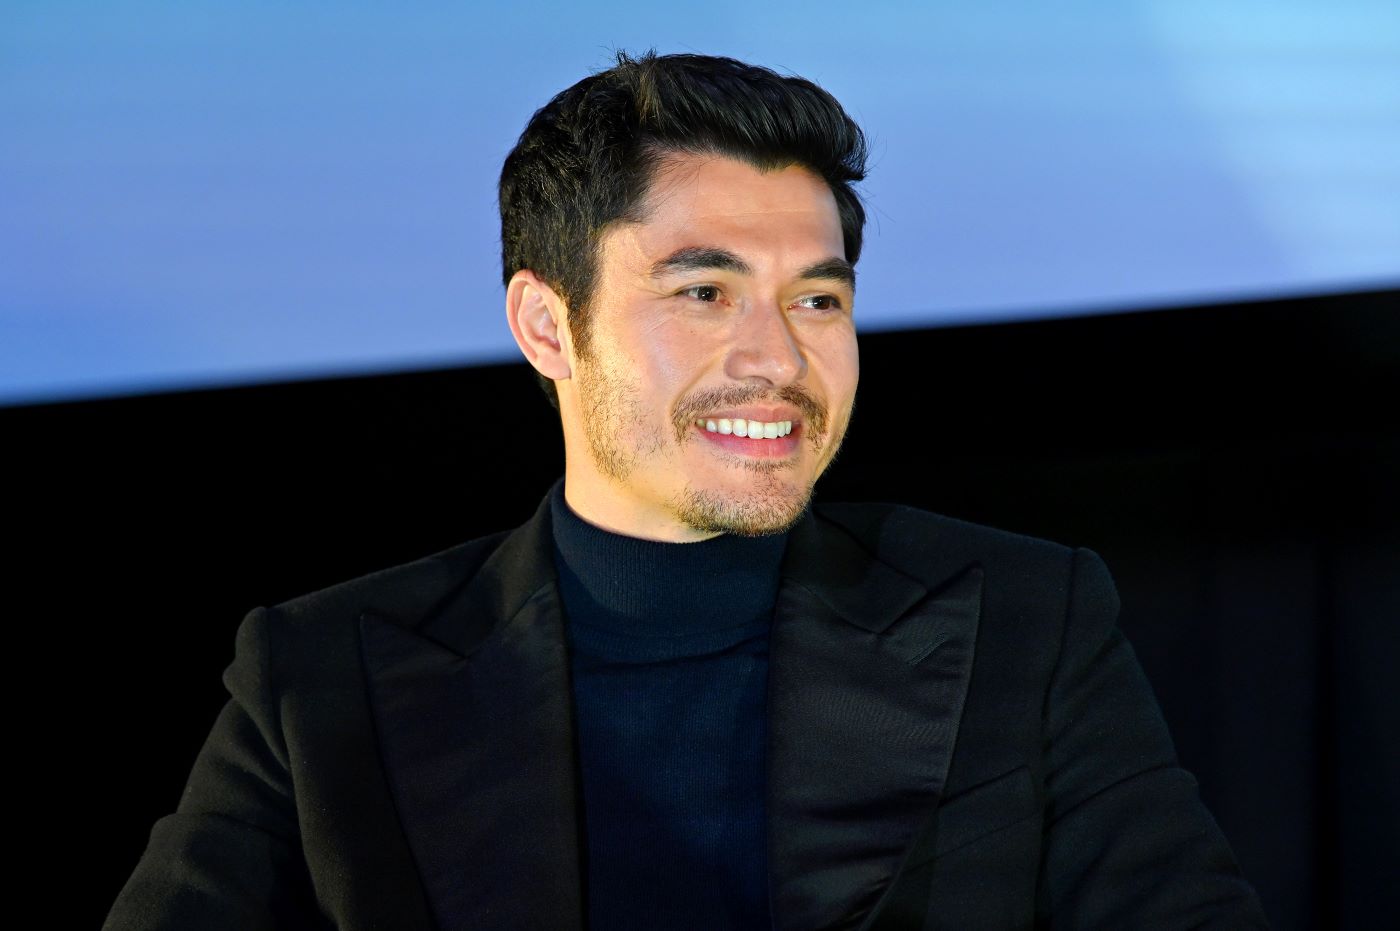 Henry Golding is wearing a black suit jacket and a black undershirt against a black and light blue background.